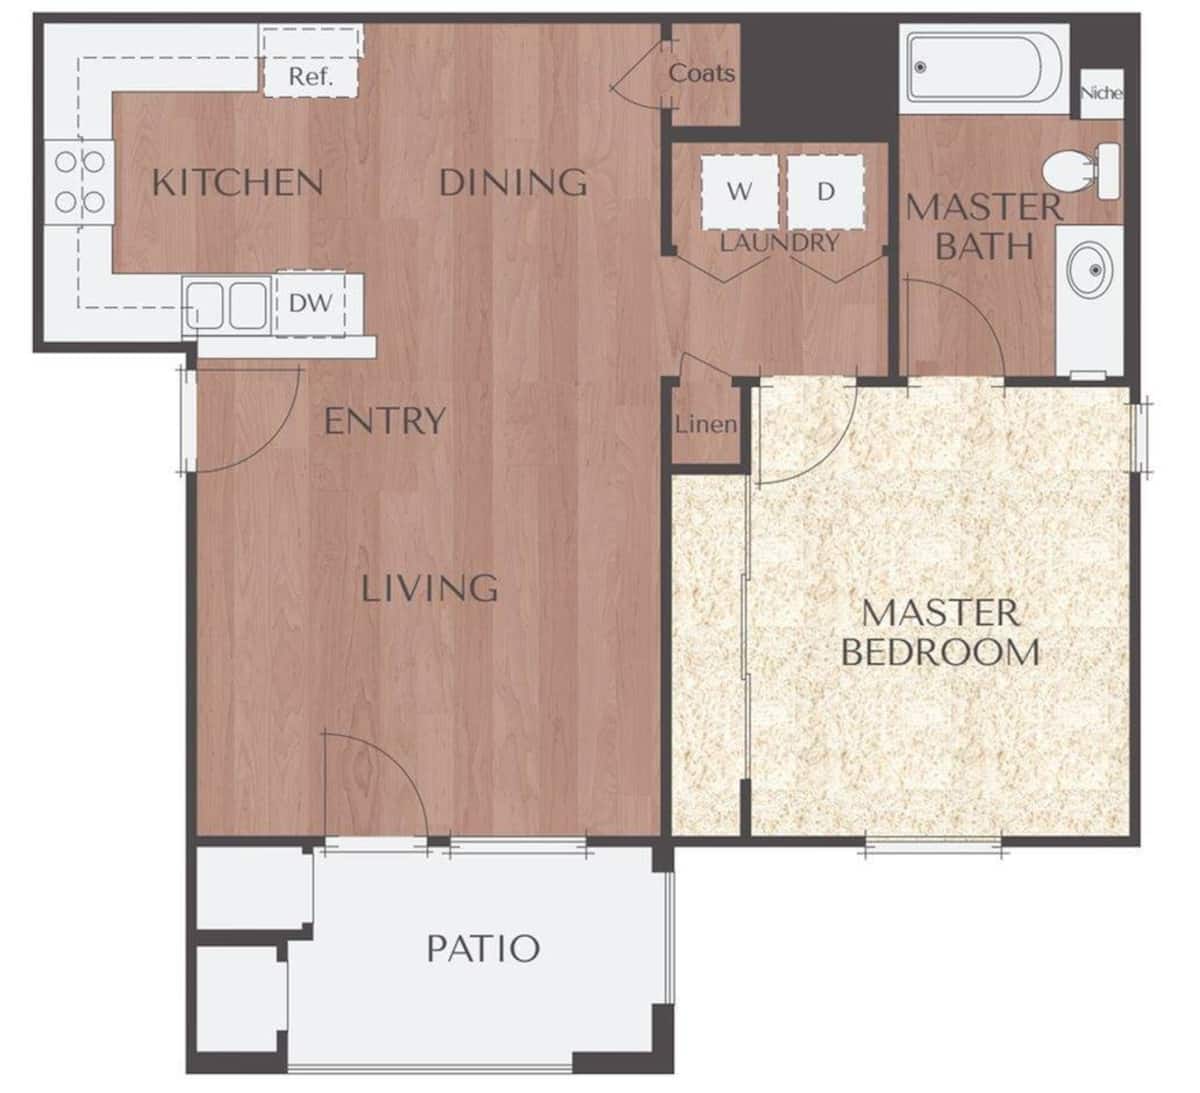 Floorplan diagram for Residence 1A, showing 1 bedroom